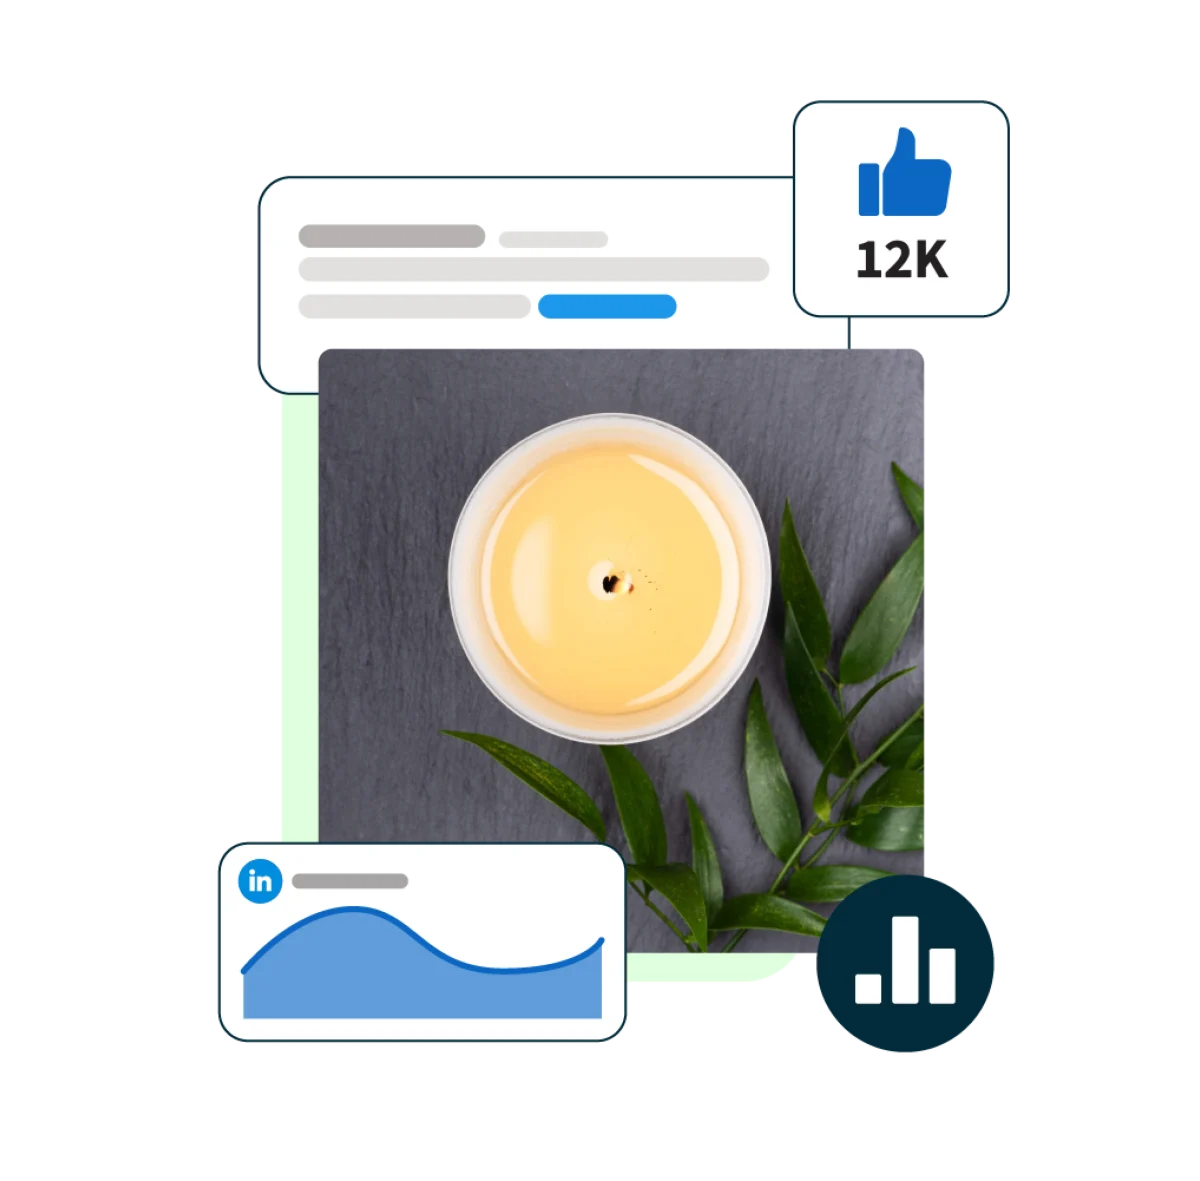 image of a candle with linkedin statistics pop-ups surrounding